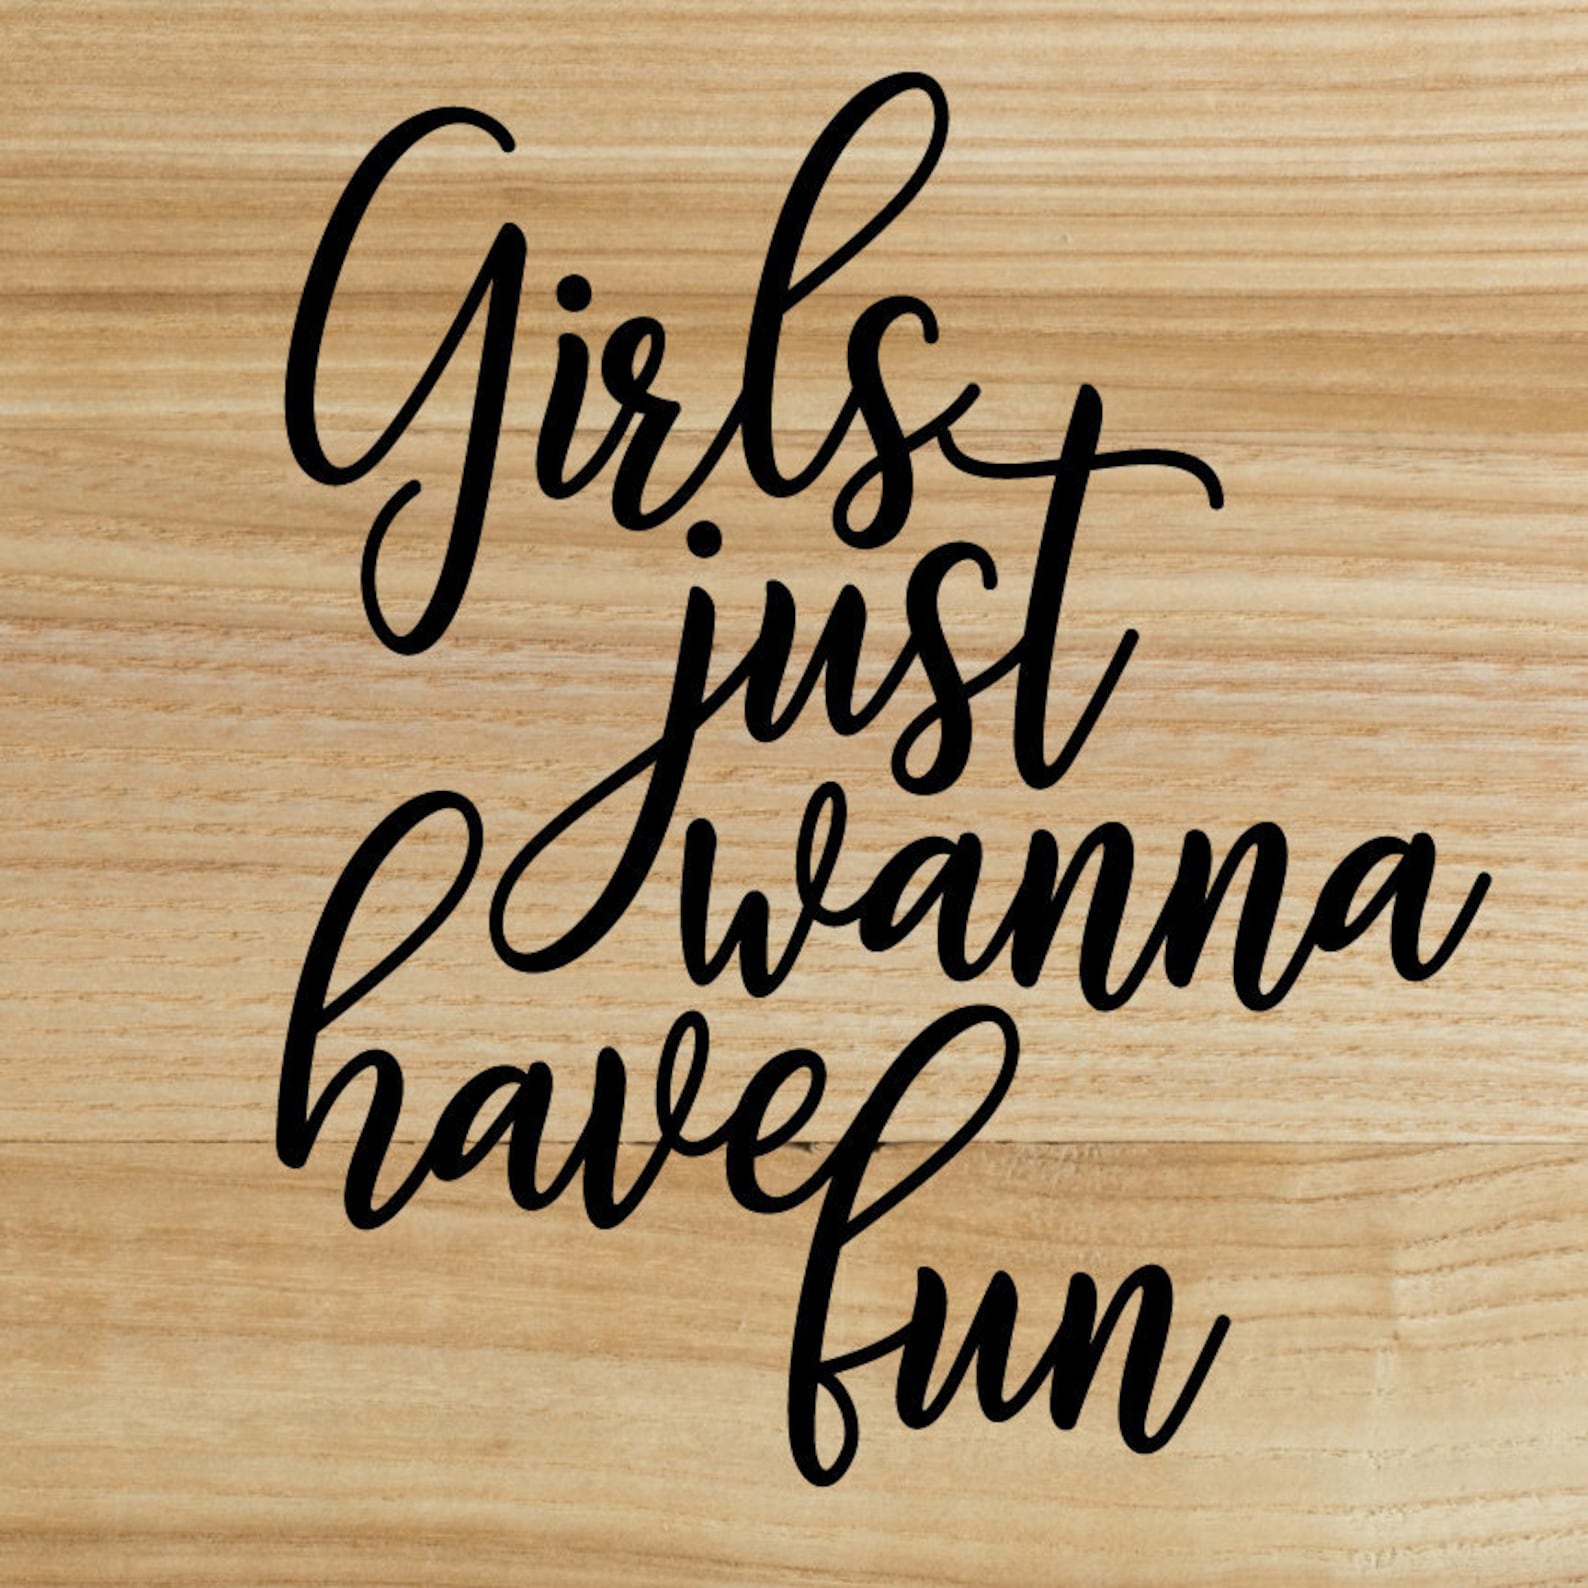 Girls Just Wanna Have Fun Svg Dxf Eps Png Cricut Cut Etsy